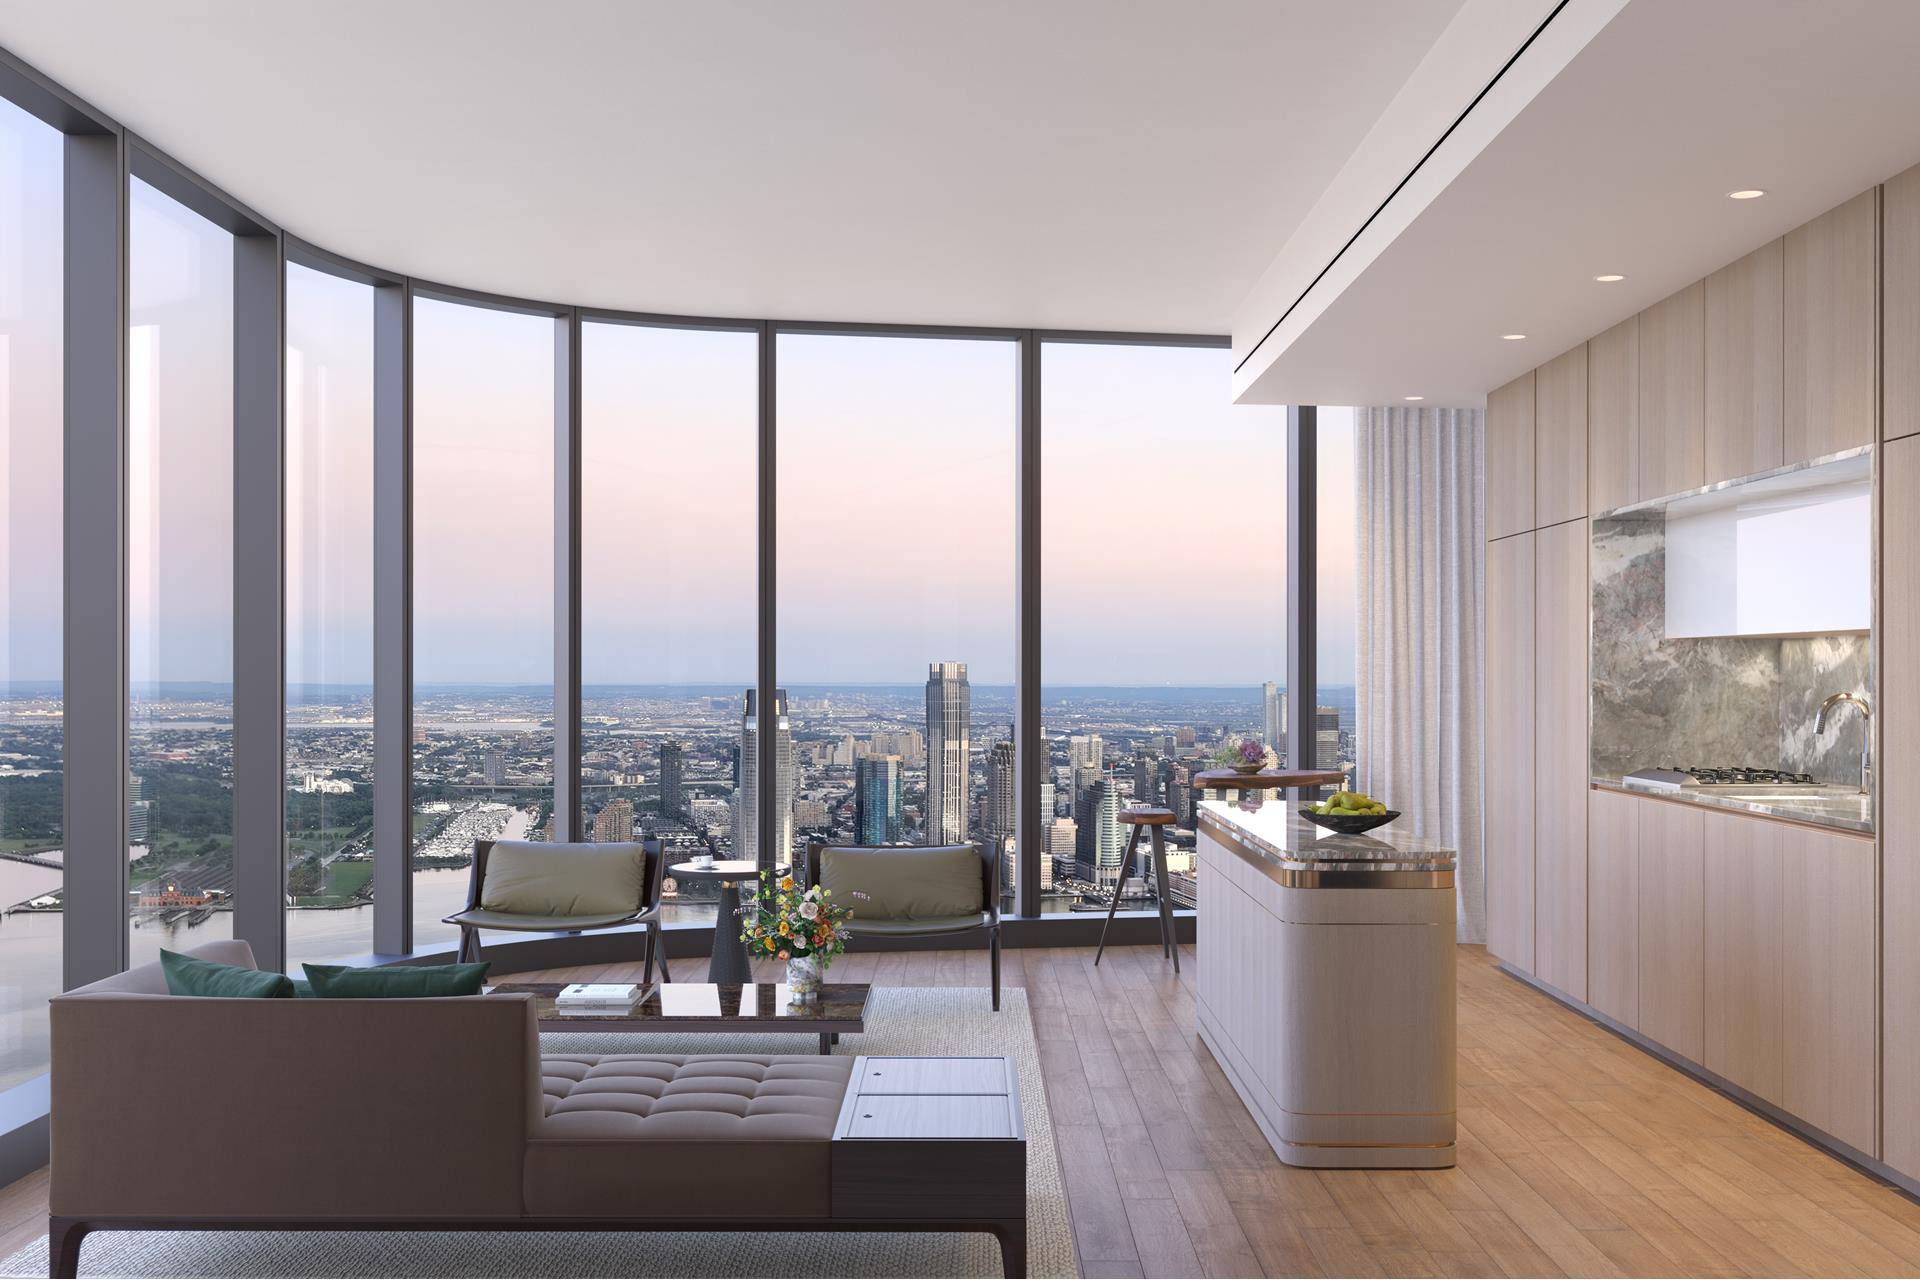 Welcome to Residence 52C at The Greenwich by Rafael Vi oly, a two bedroom, two and a half bathroom home featuring magnificent southern and western exposures with panoramic views of ...